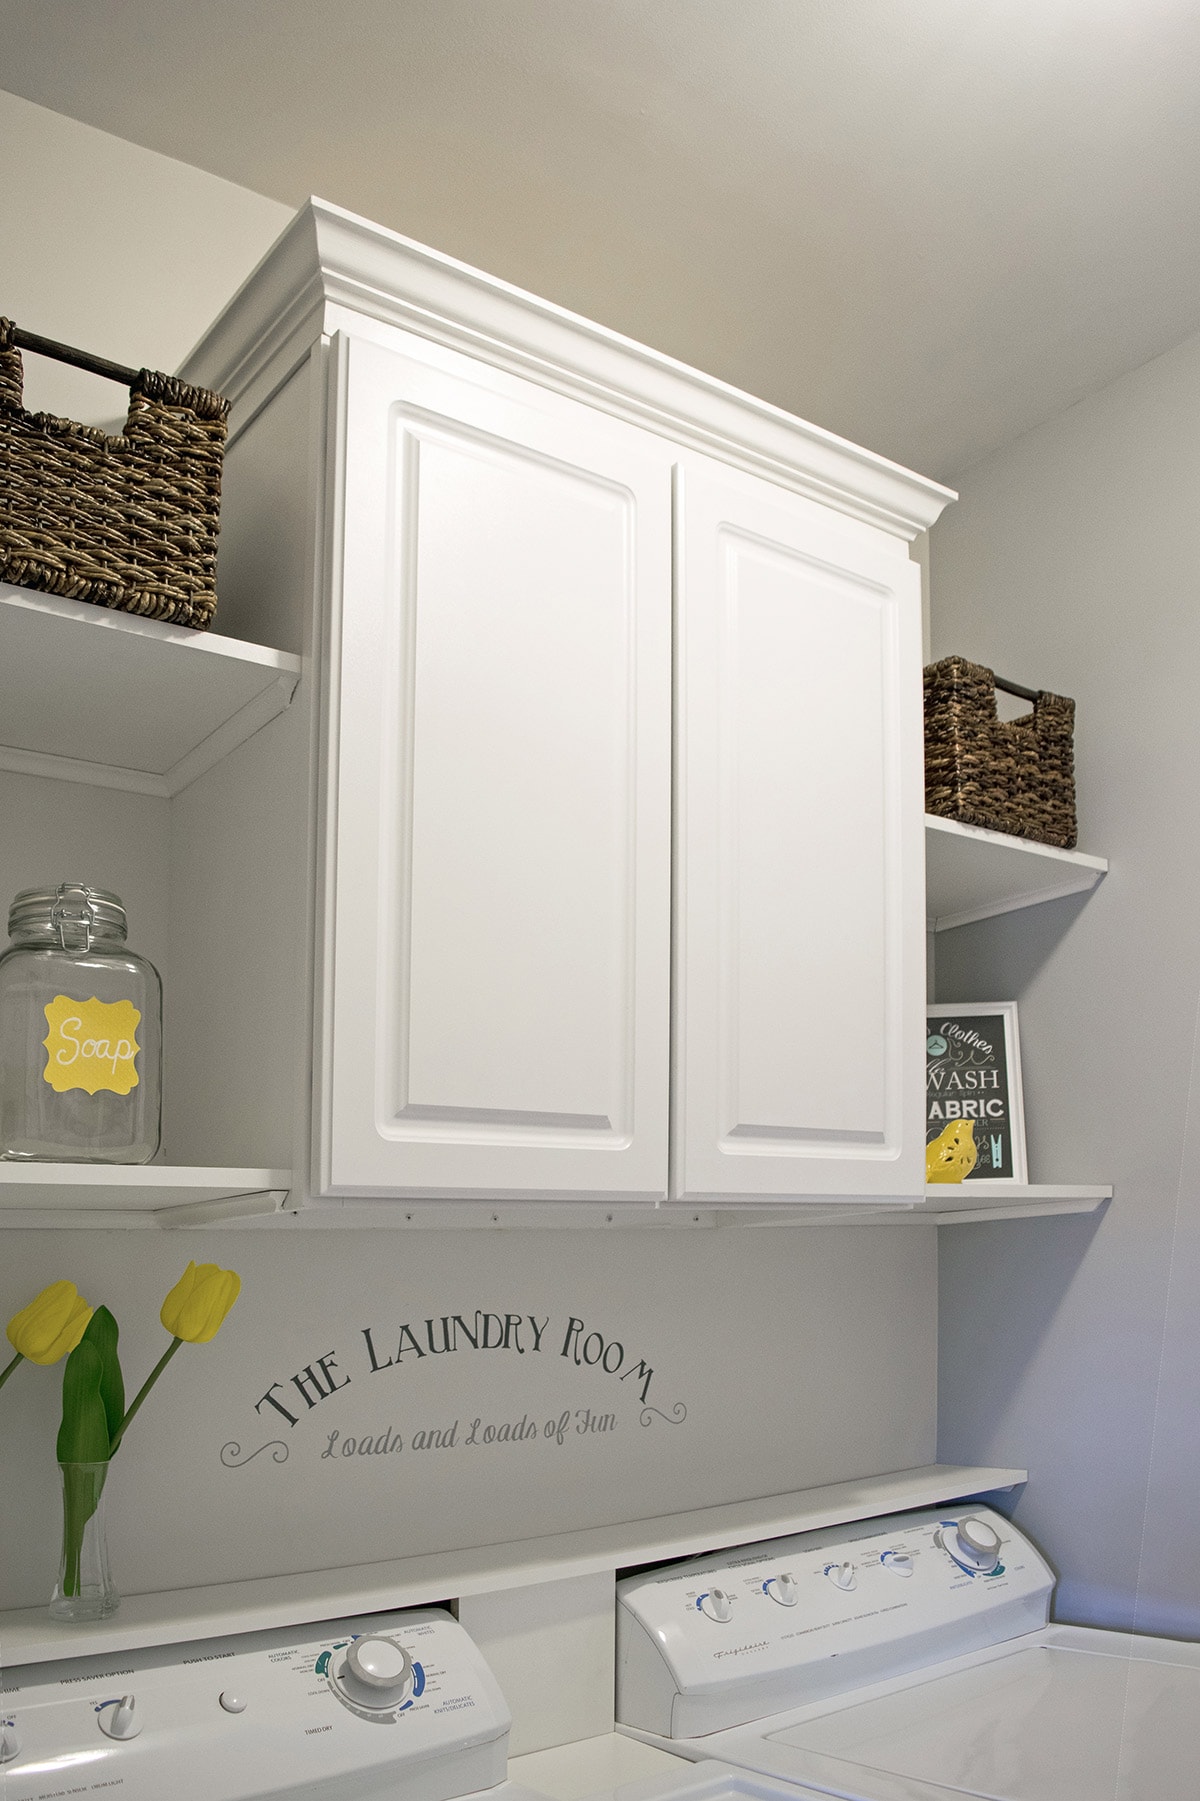 How to Install Laundry Room Cabinets?